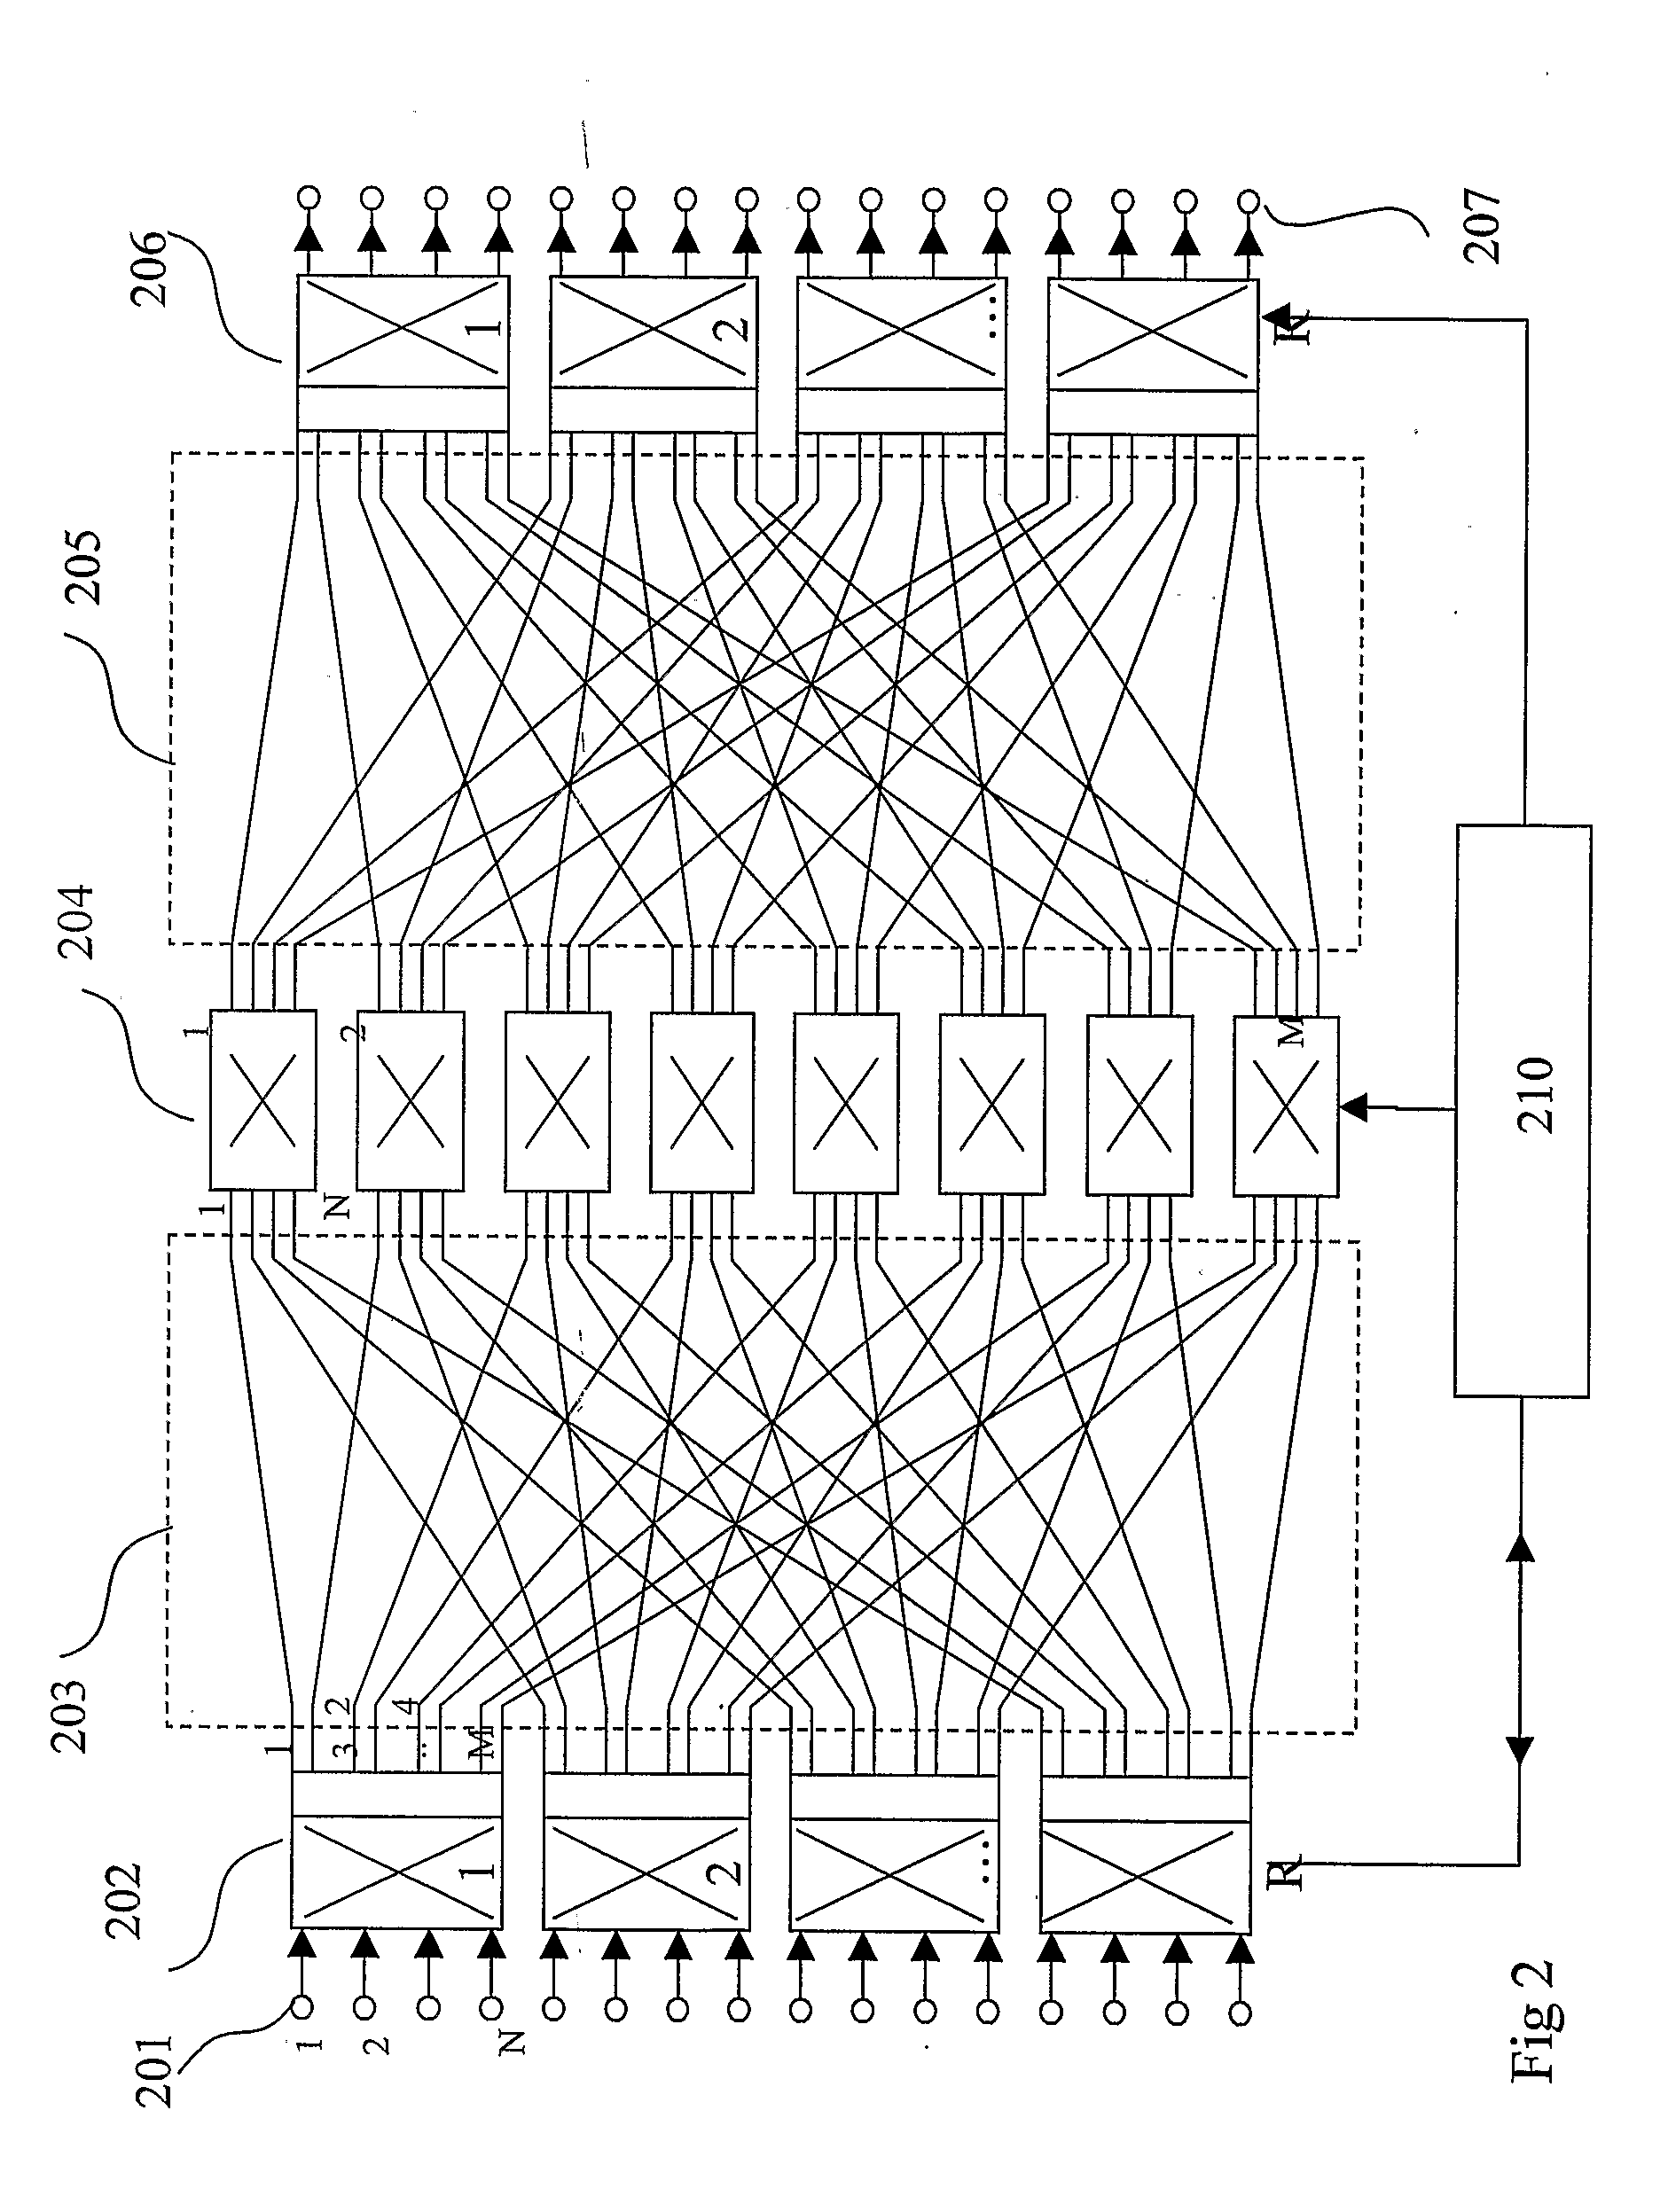 Compact Load Balanced Switching Structures for Packet Based Communication Networks